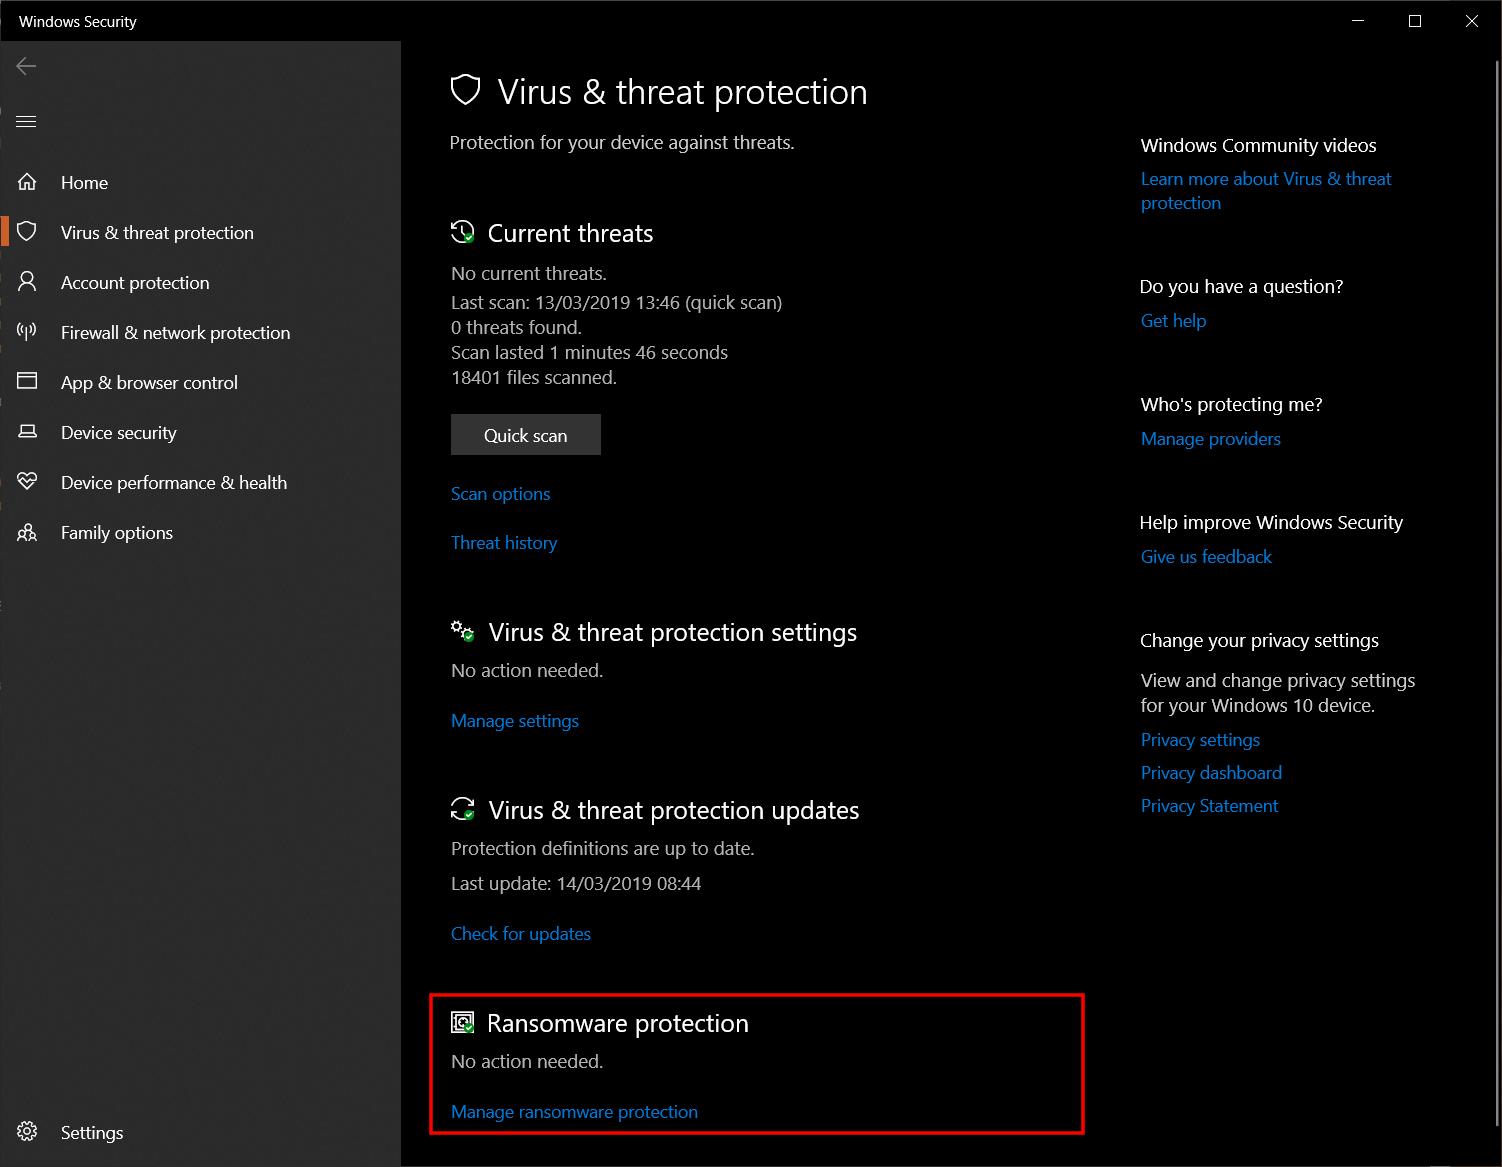 Windows 10 Virus & threat protection settings with "Ransomware protection" highlighted